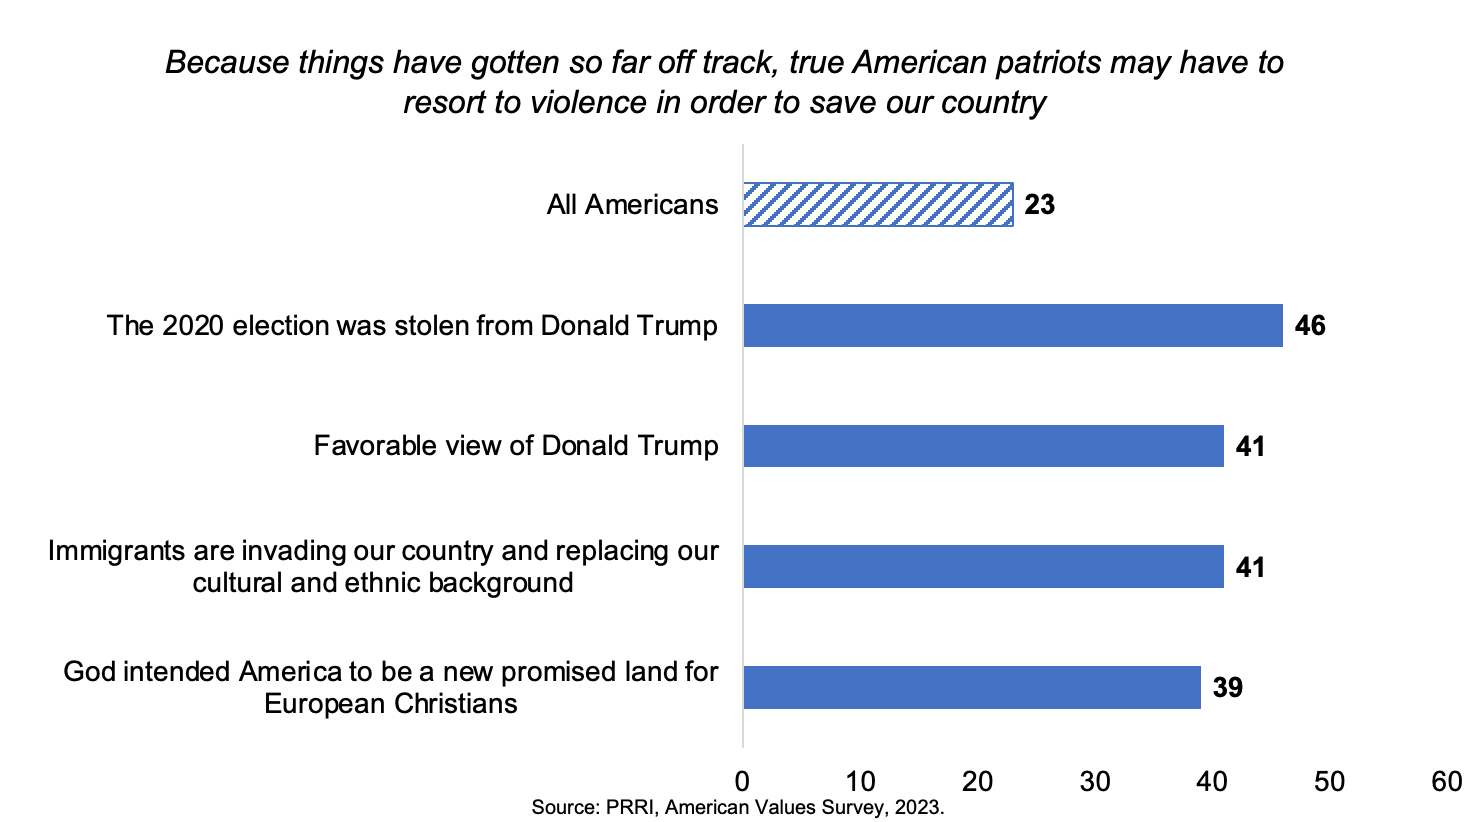 "Because things have gotten so far off track, true American patriots may have to resort to violence in order to save our country" (Graphic courtesy PRRI)